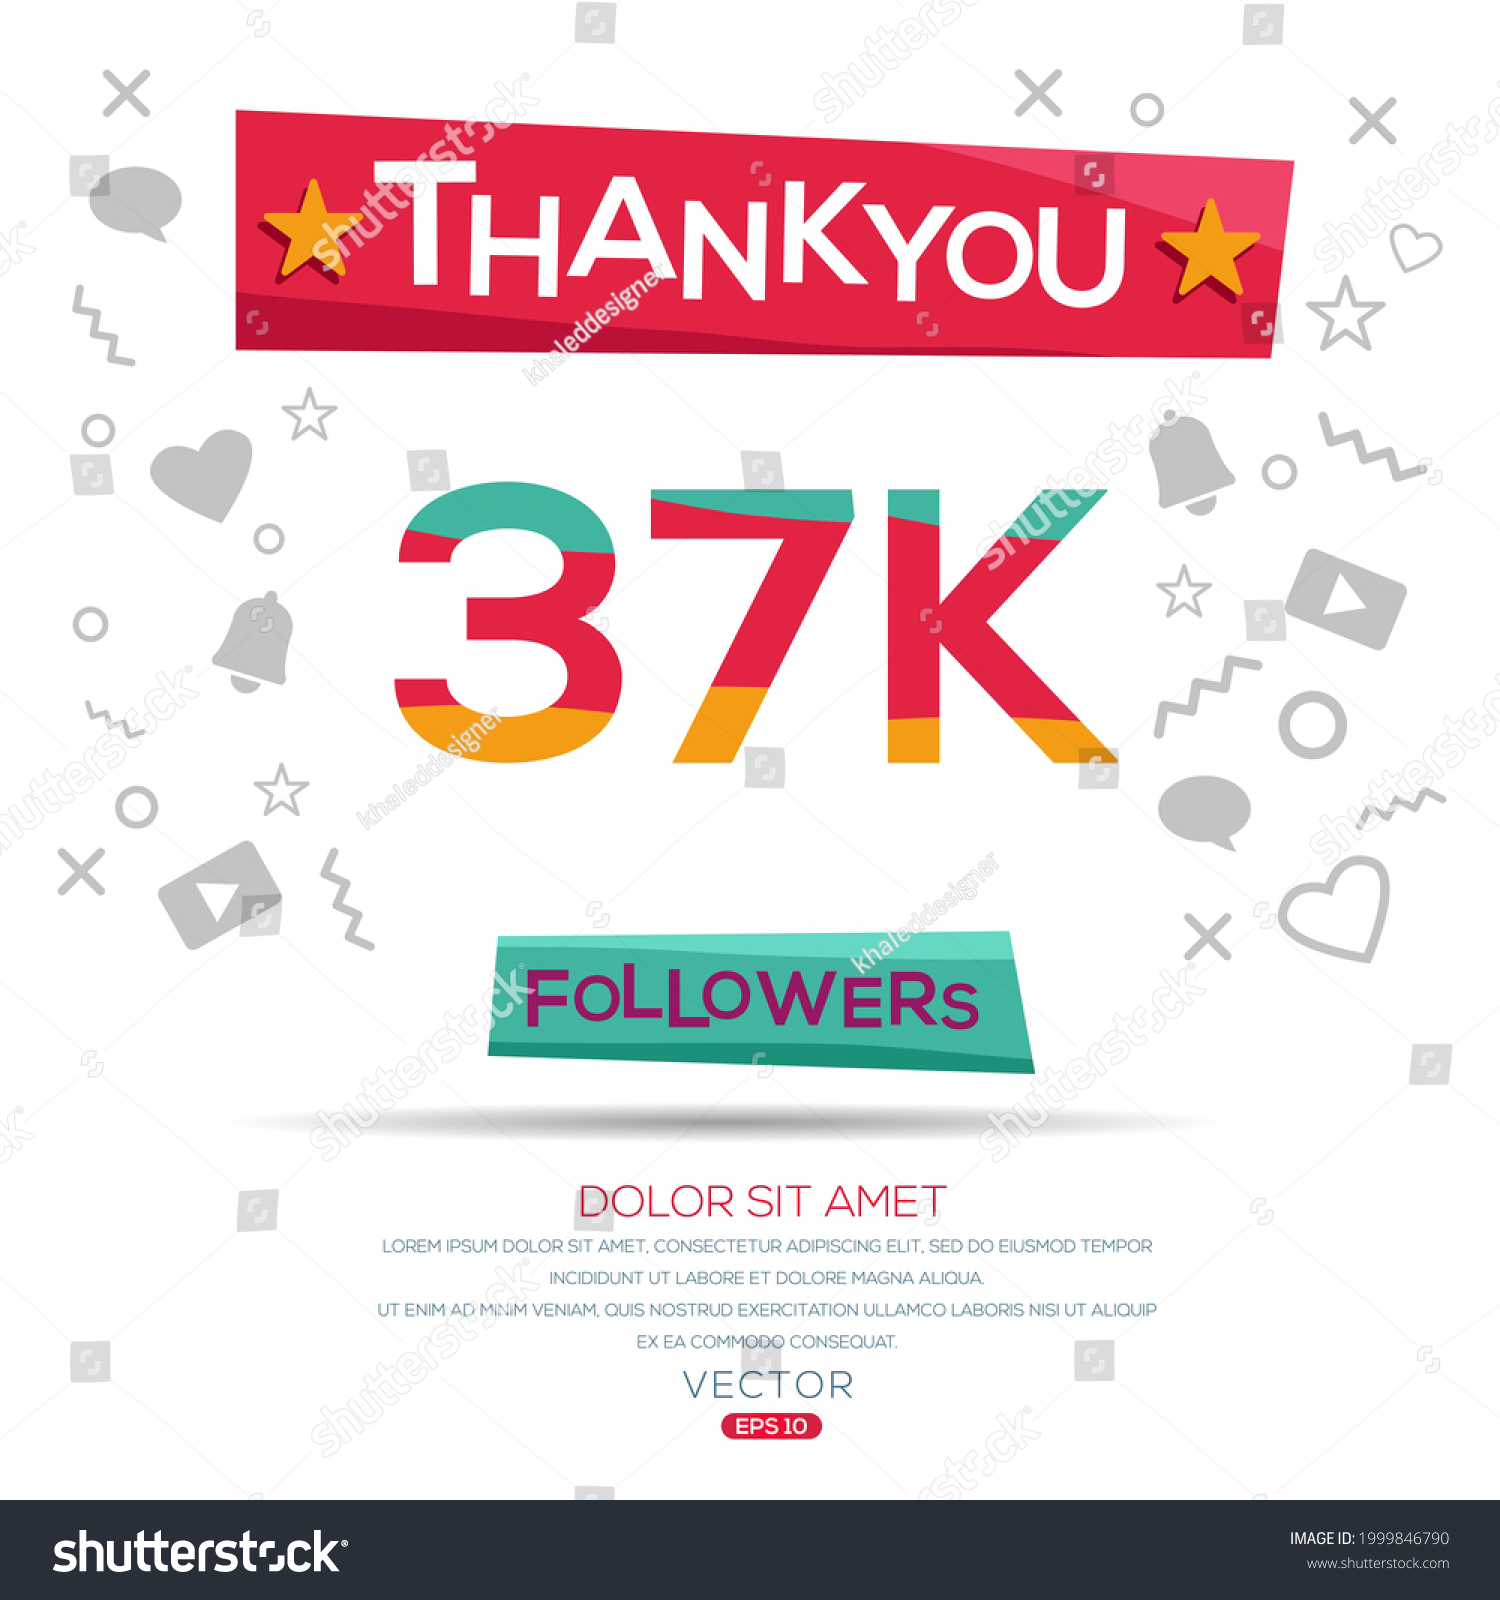 SVG of Creative Thank you (37k, 37000) followers celebration template design for social network and follower ,Vector illustration. svg